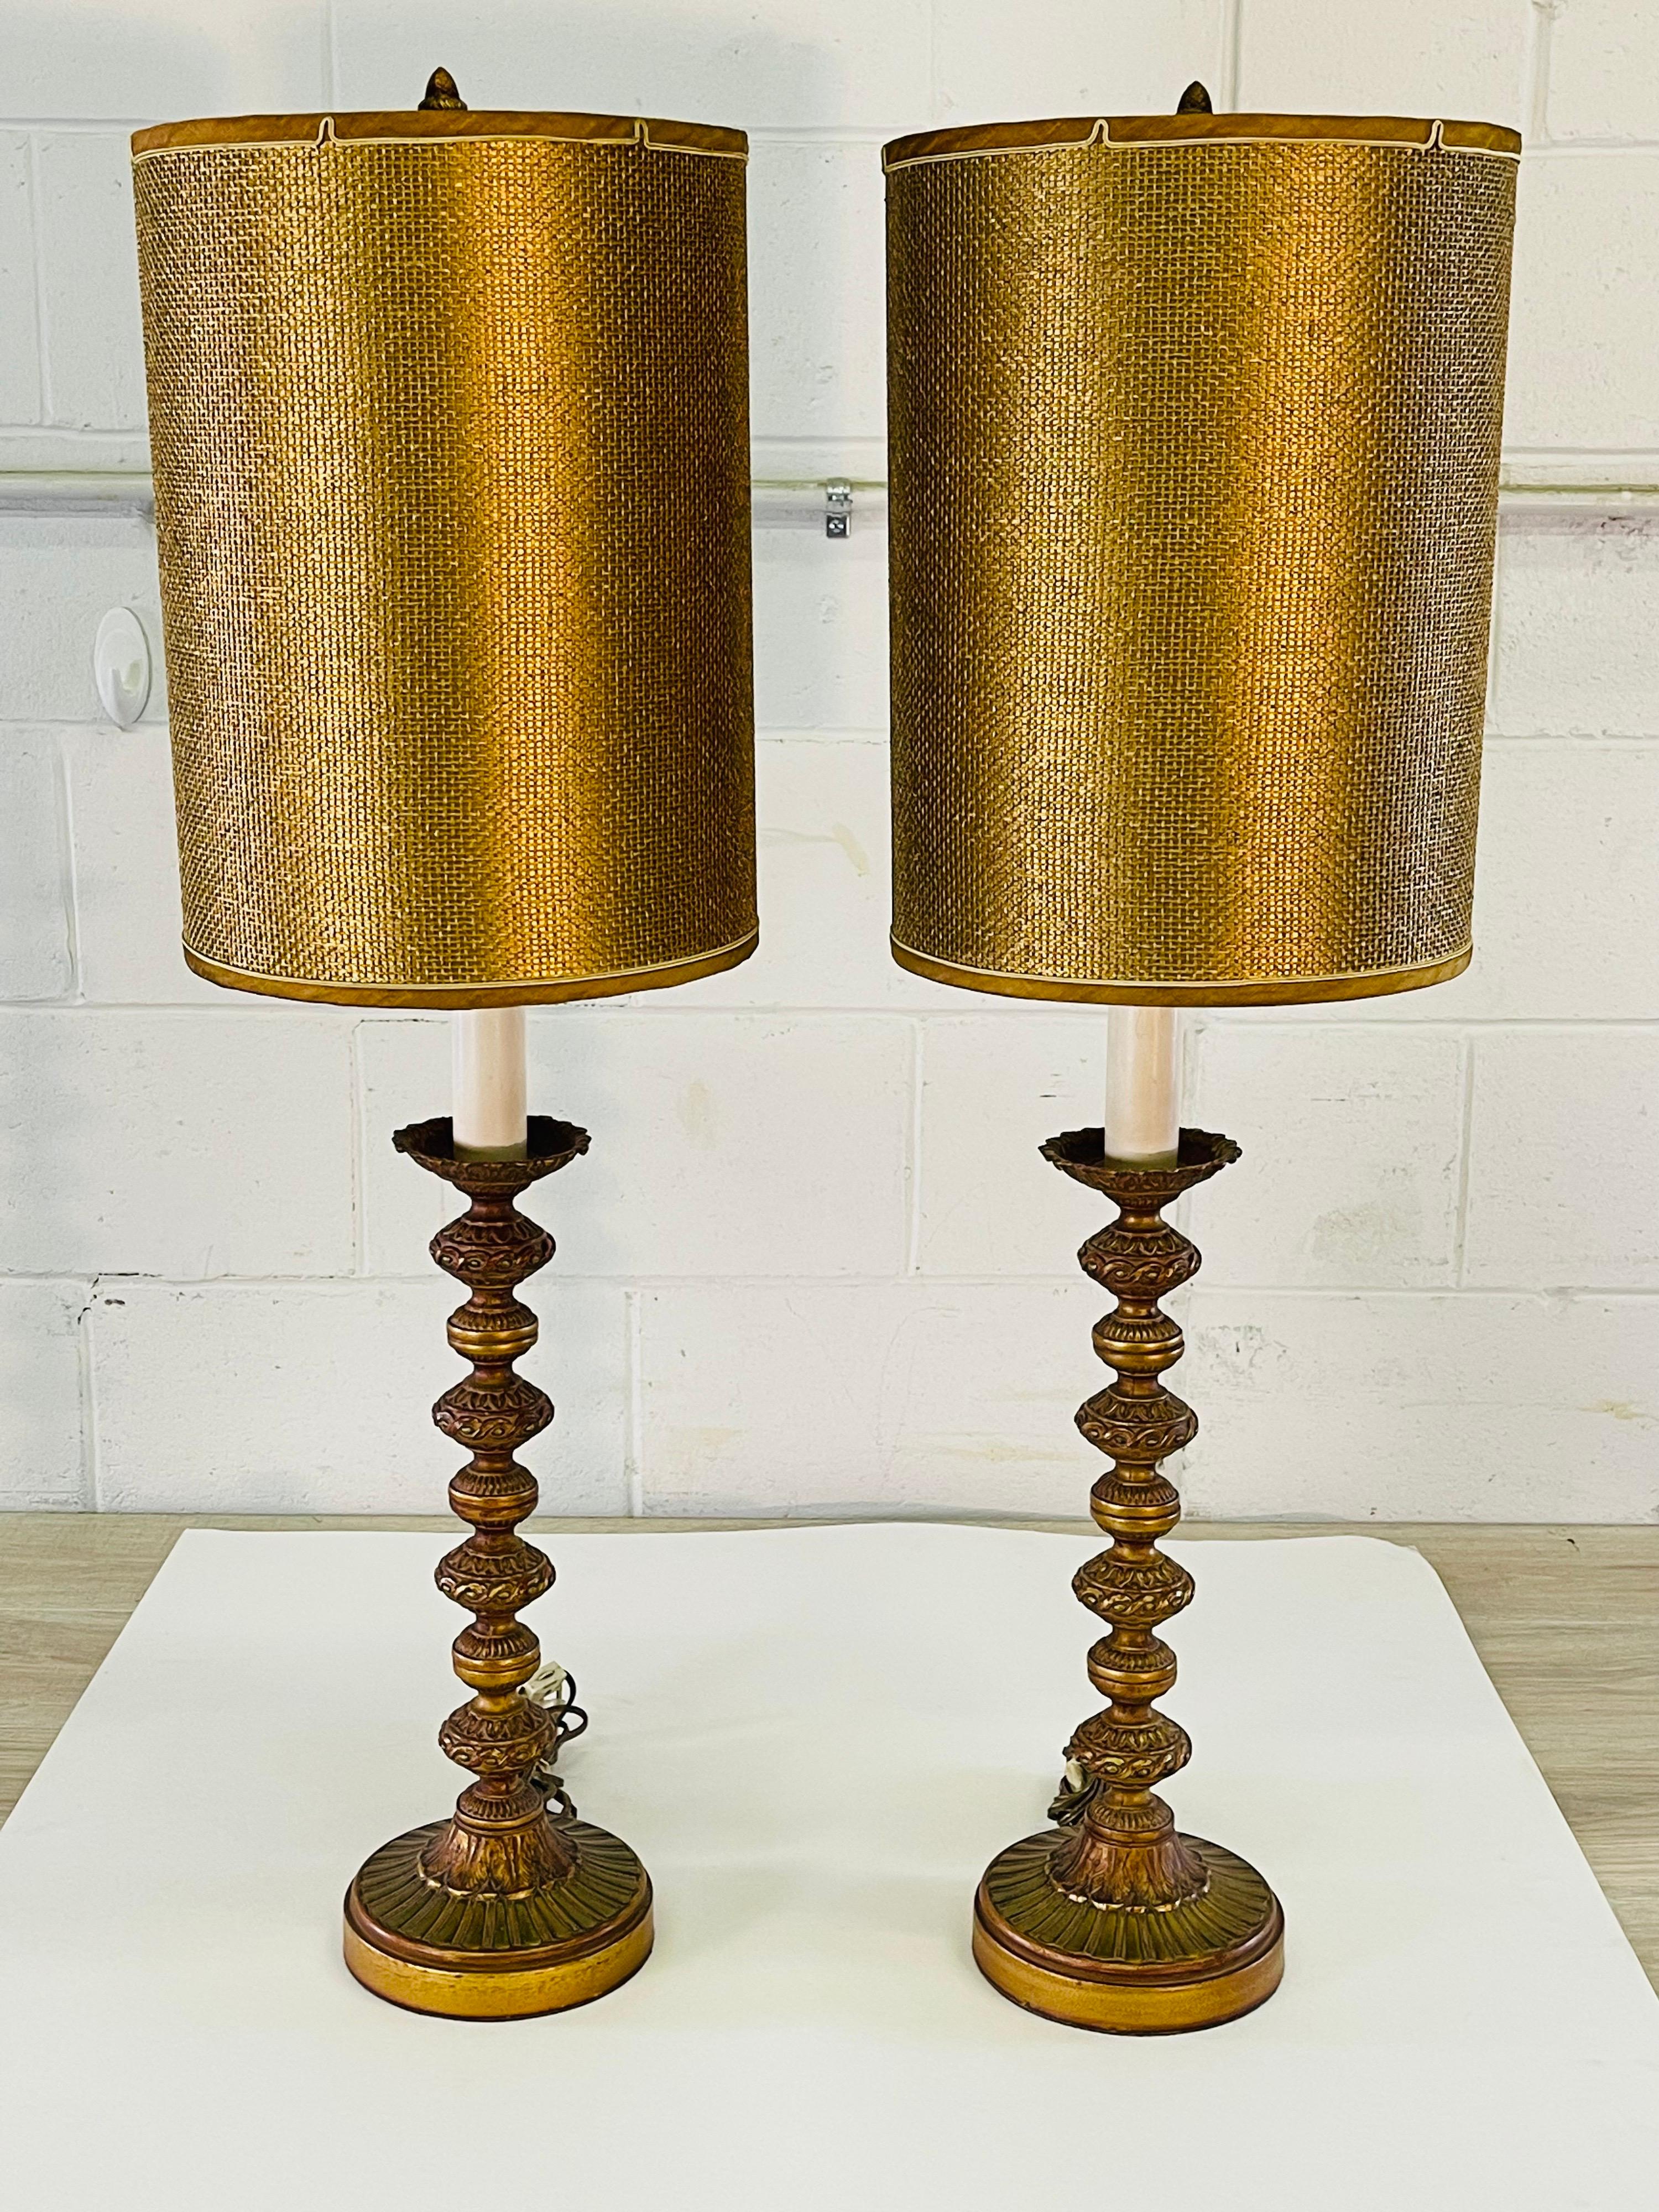 1960s lamps